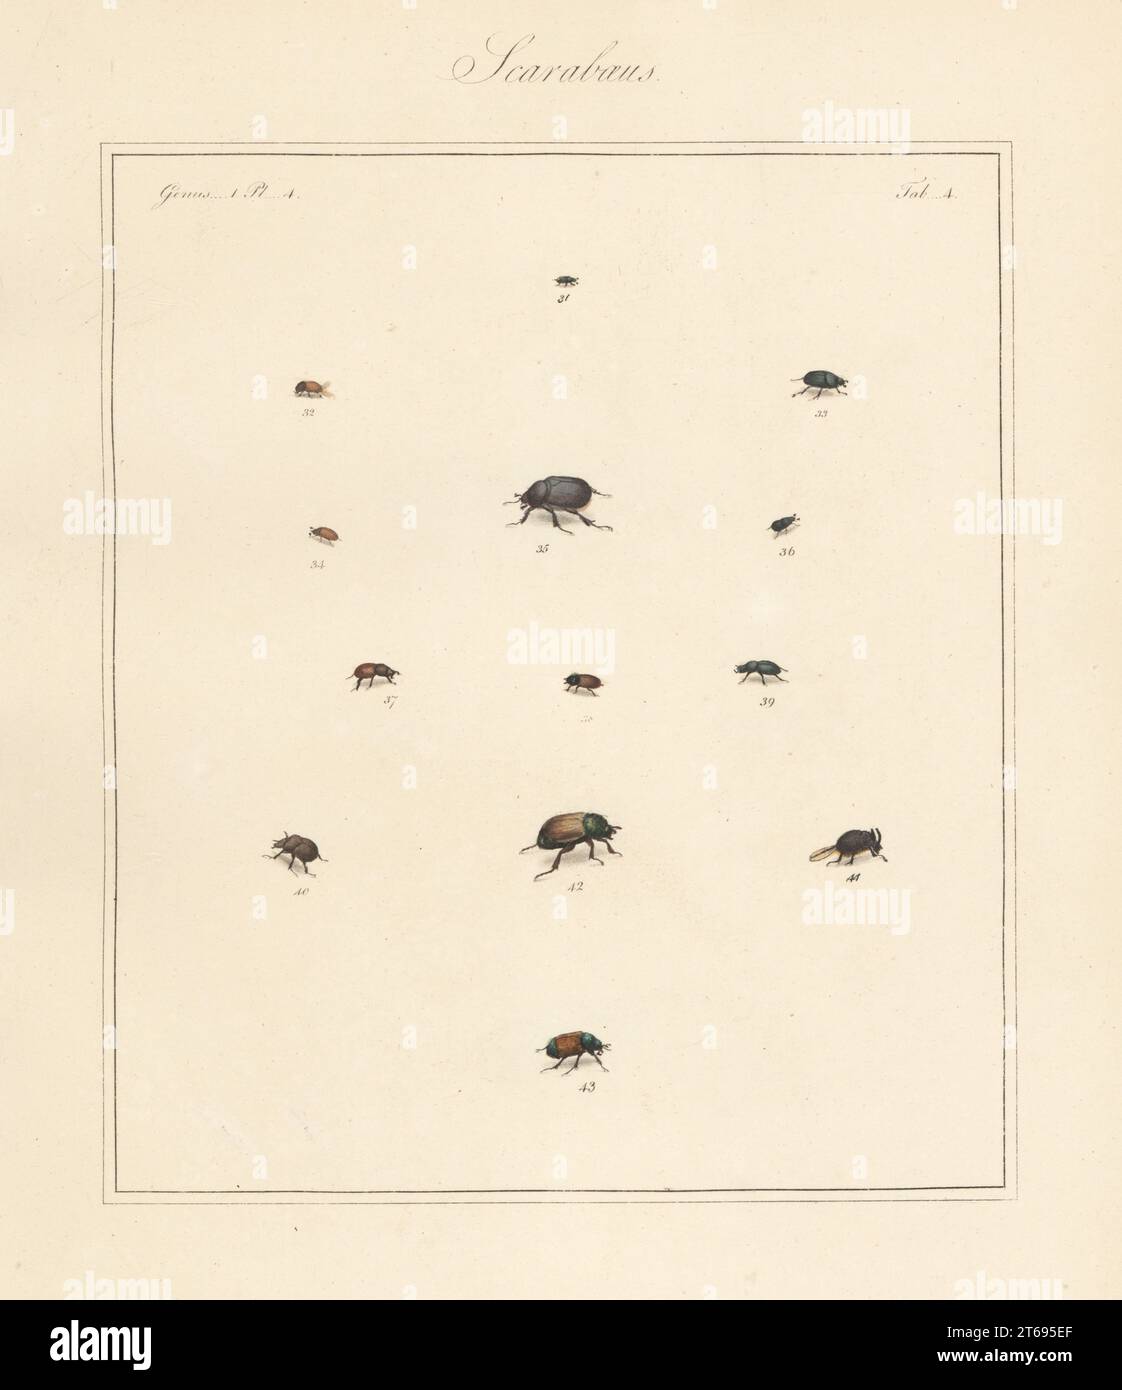 Species of scarab beetles. Bloody small dung beetle, Otophorus haemorrhoidalis 31, subterranean small dung beetle, Eupleurus subterraneus 33, Esymus merdarius 34, N.S. 35, 38, Onthophagus ovatus 36, erratic small dung beetle, Colobopterus erraticus 37, Diplognatha gagates 39, Odonteus armiger 40,41, Anomala dubia subsp. dubia 42, and garden chafer, Phyllopertha horticola 43. Handcoloured copperplate engraving from Thomas Martyns The English Entomologist, Exhibiting all the Coleopterous Insects found in England, Academy for Illustrating and Painting Natural History, London, 1792. Stock Photo